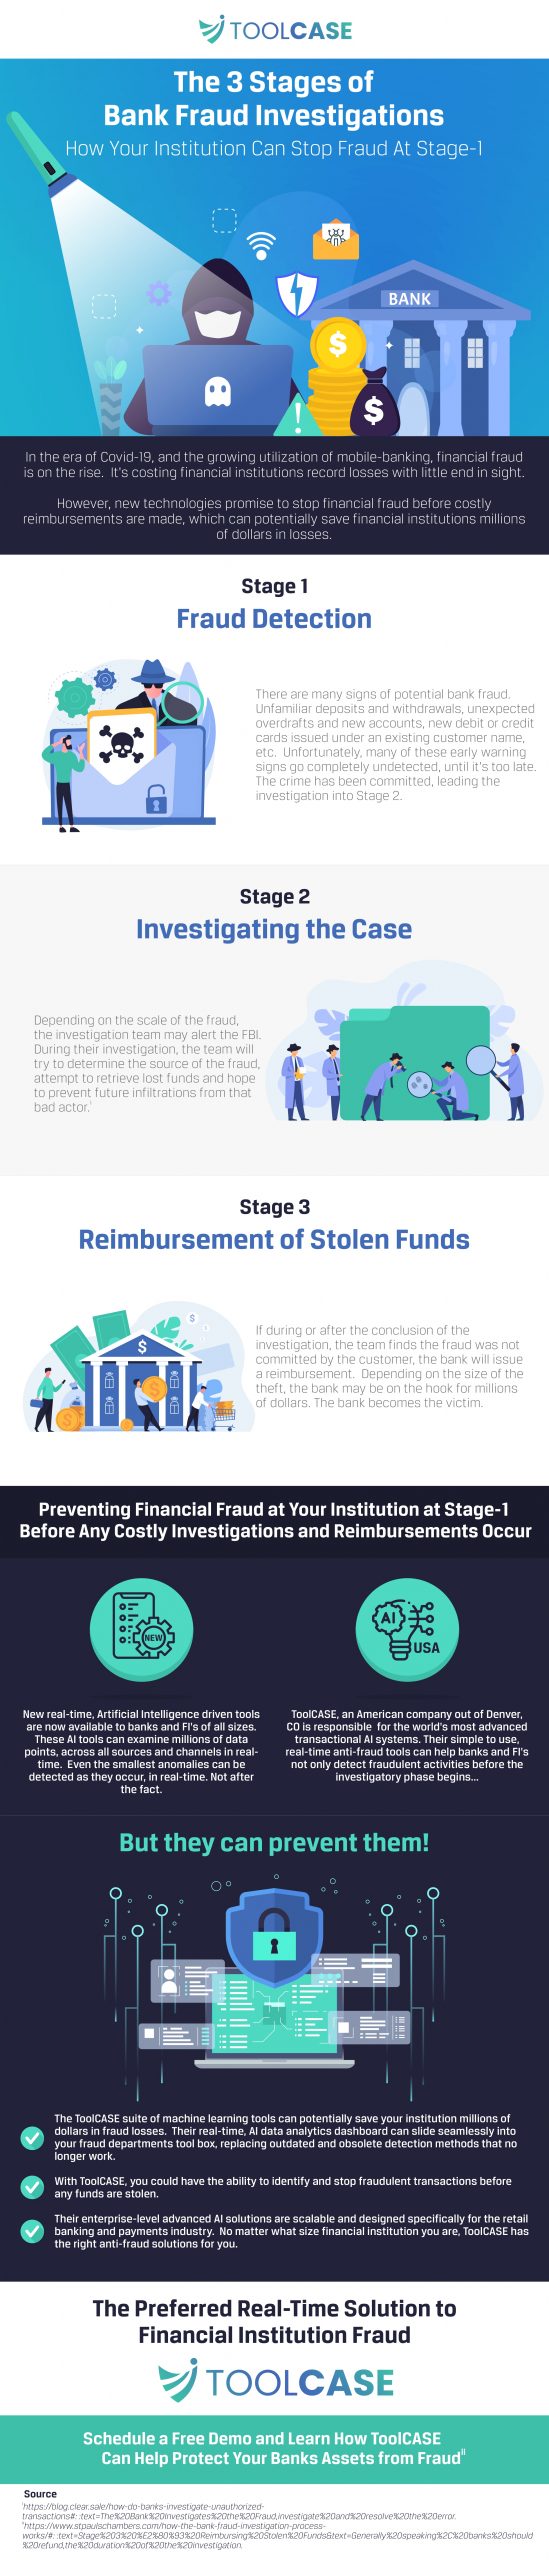 toolcase-infographic-finance-1